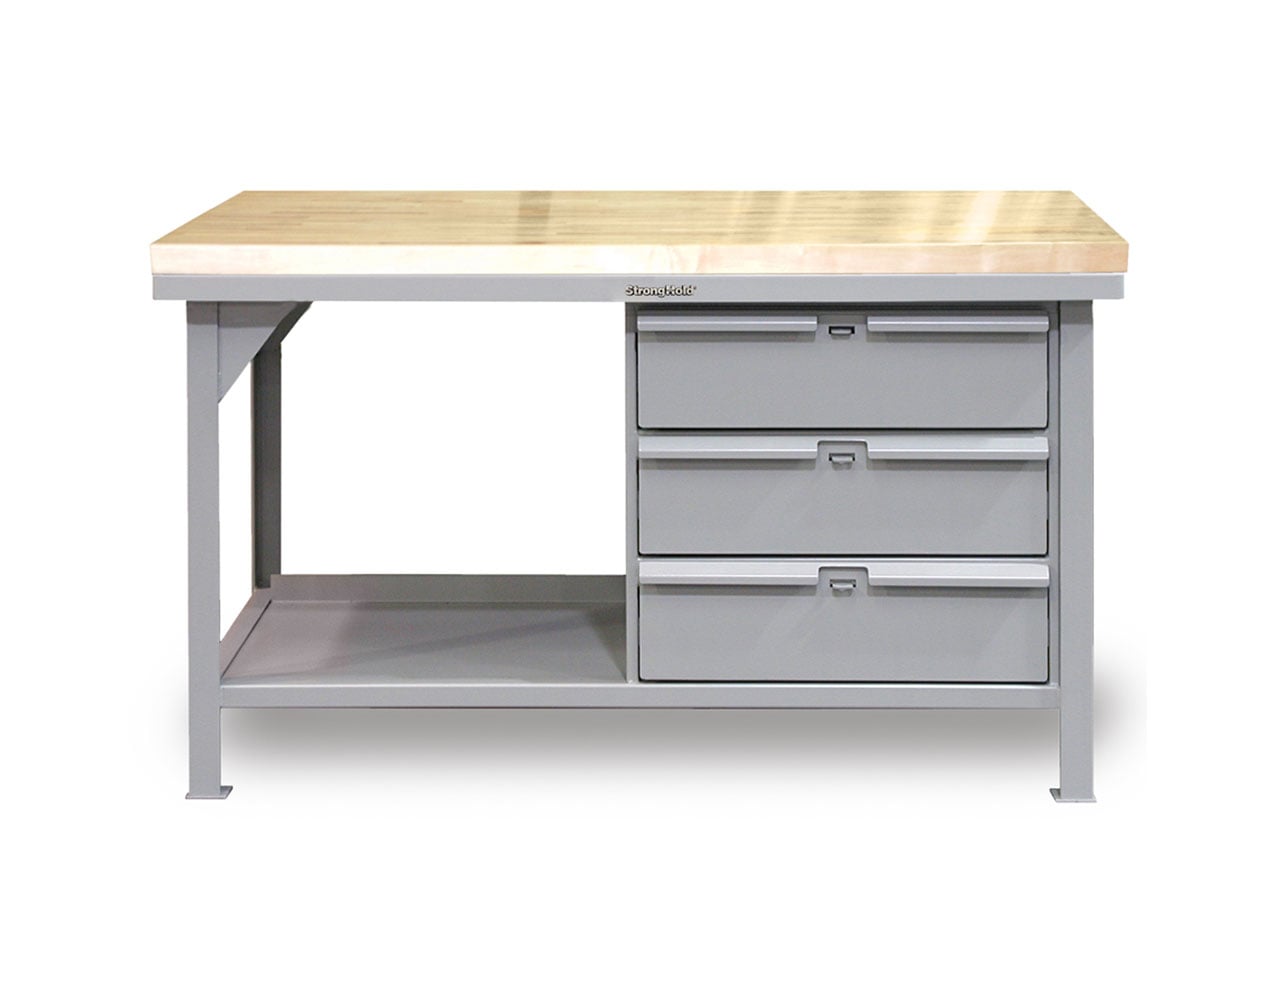 Extreme Duty 7 GA Shop Table with UHMW Top, 3 Drawers, 1 Shelf - 72 In. W x 36 In. D x 34 In. H